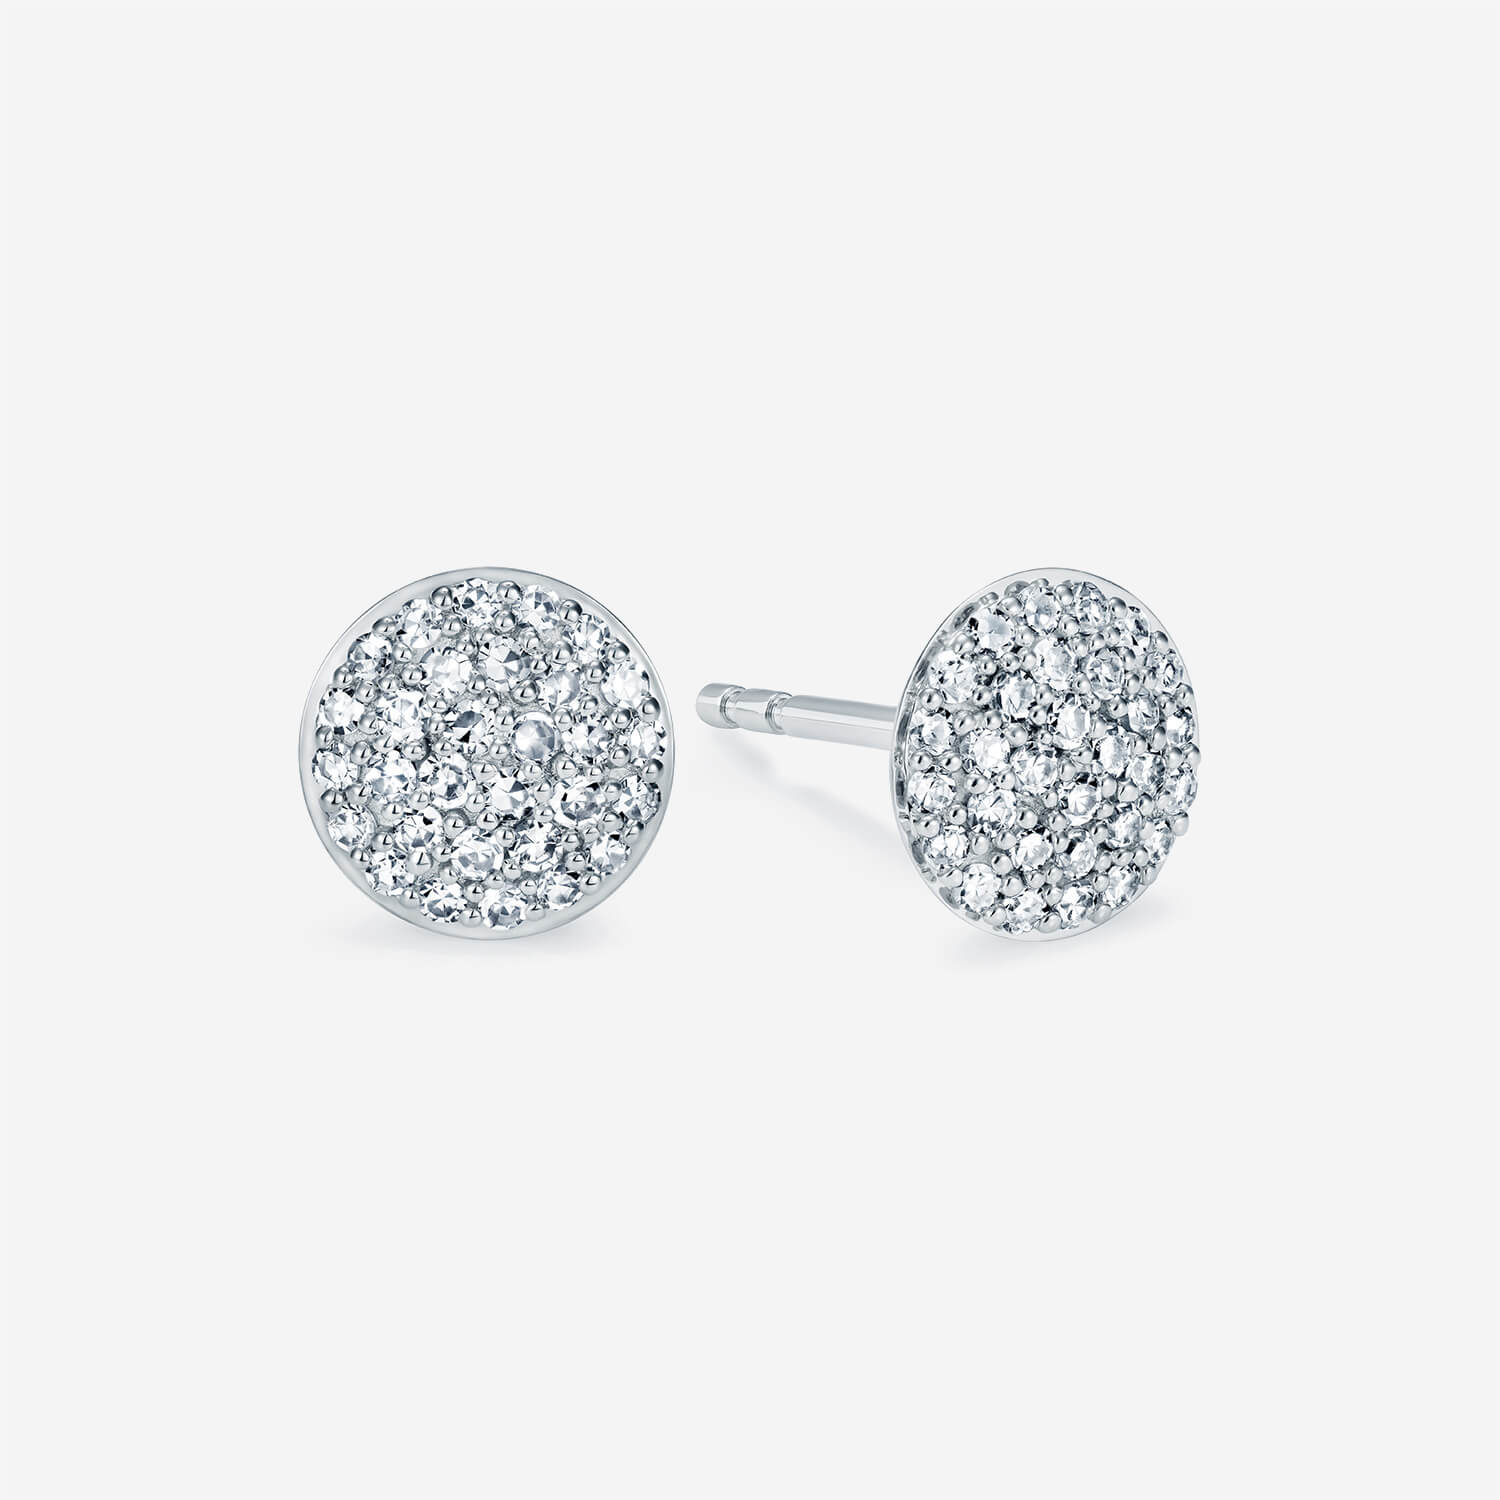 886 Royal Mint Earrings 886 Pavé Large Studs in 18ct White Gold